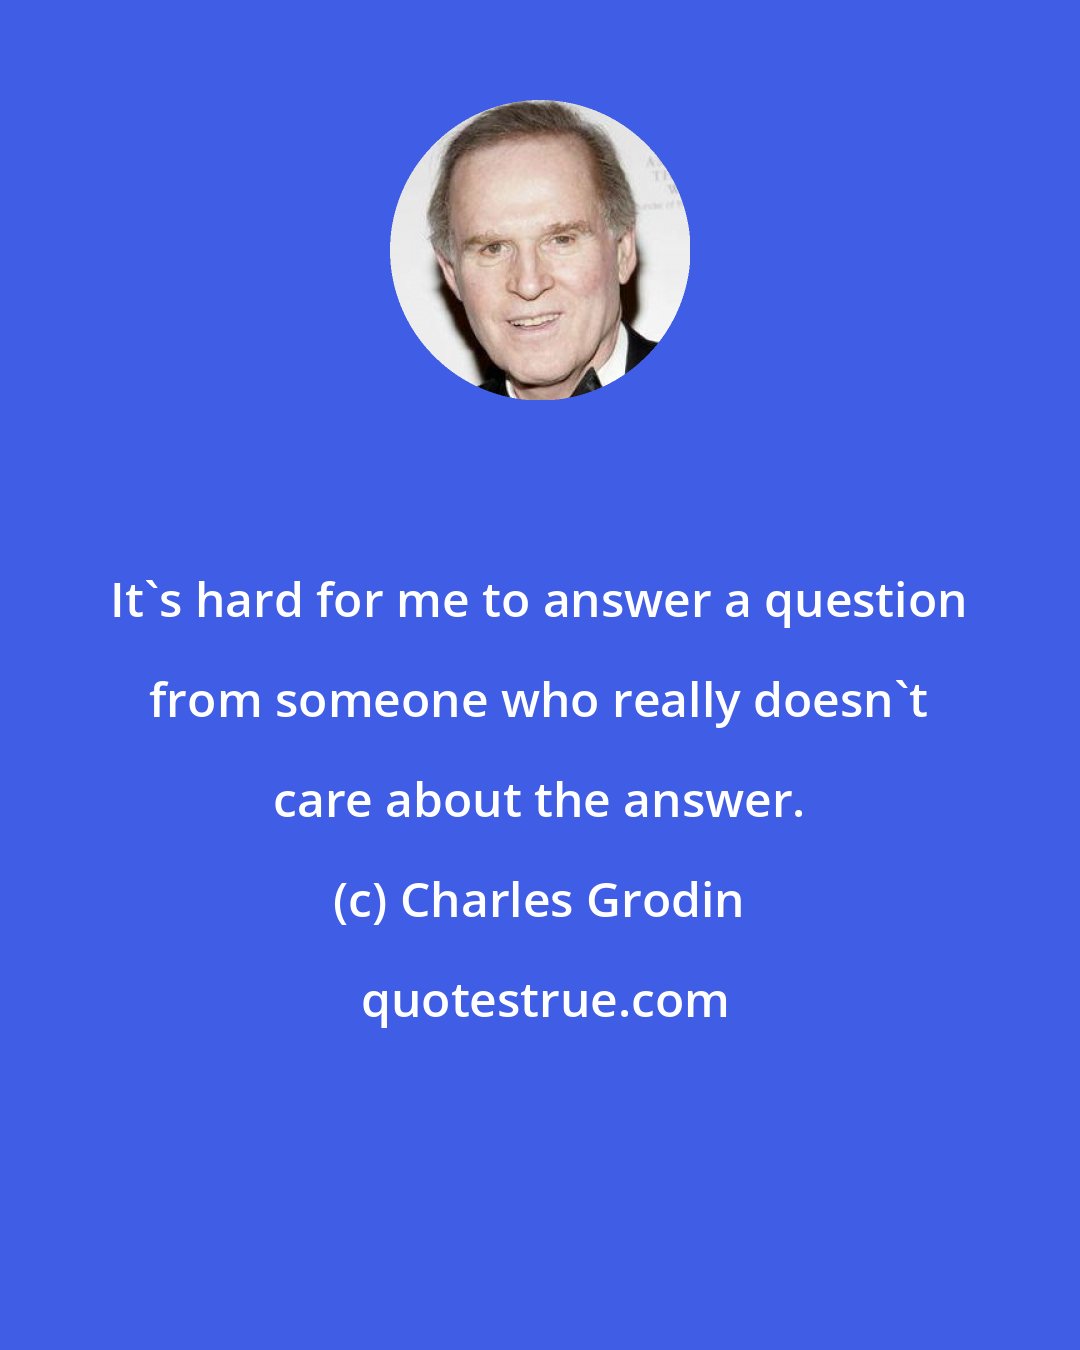 Charles Grodin: It's hard for me to answer a question from someone who really doesn't care about the answer.